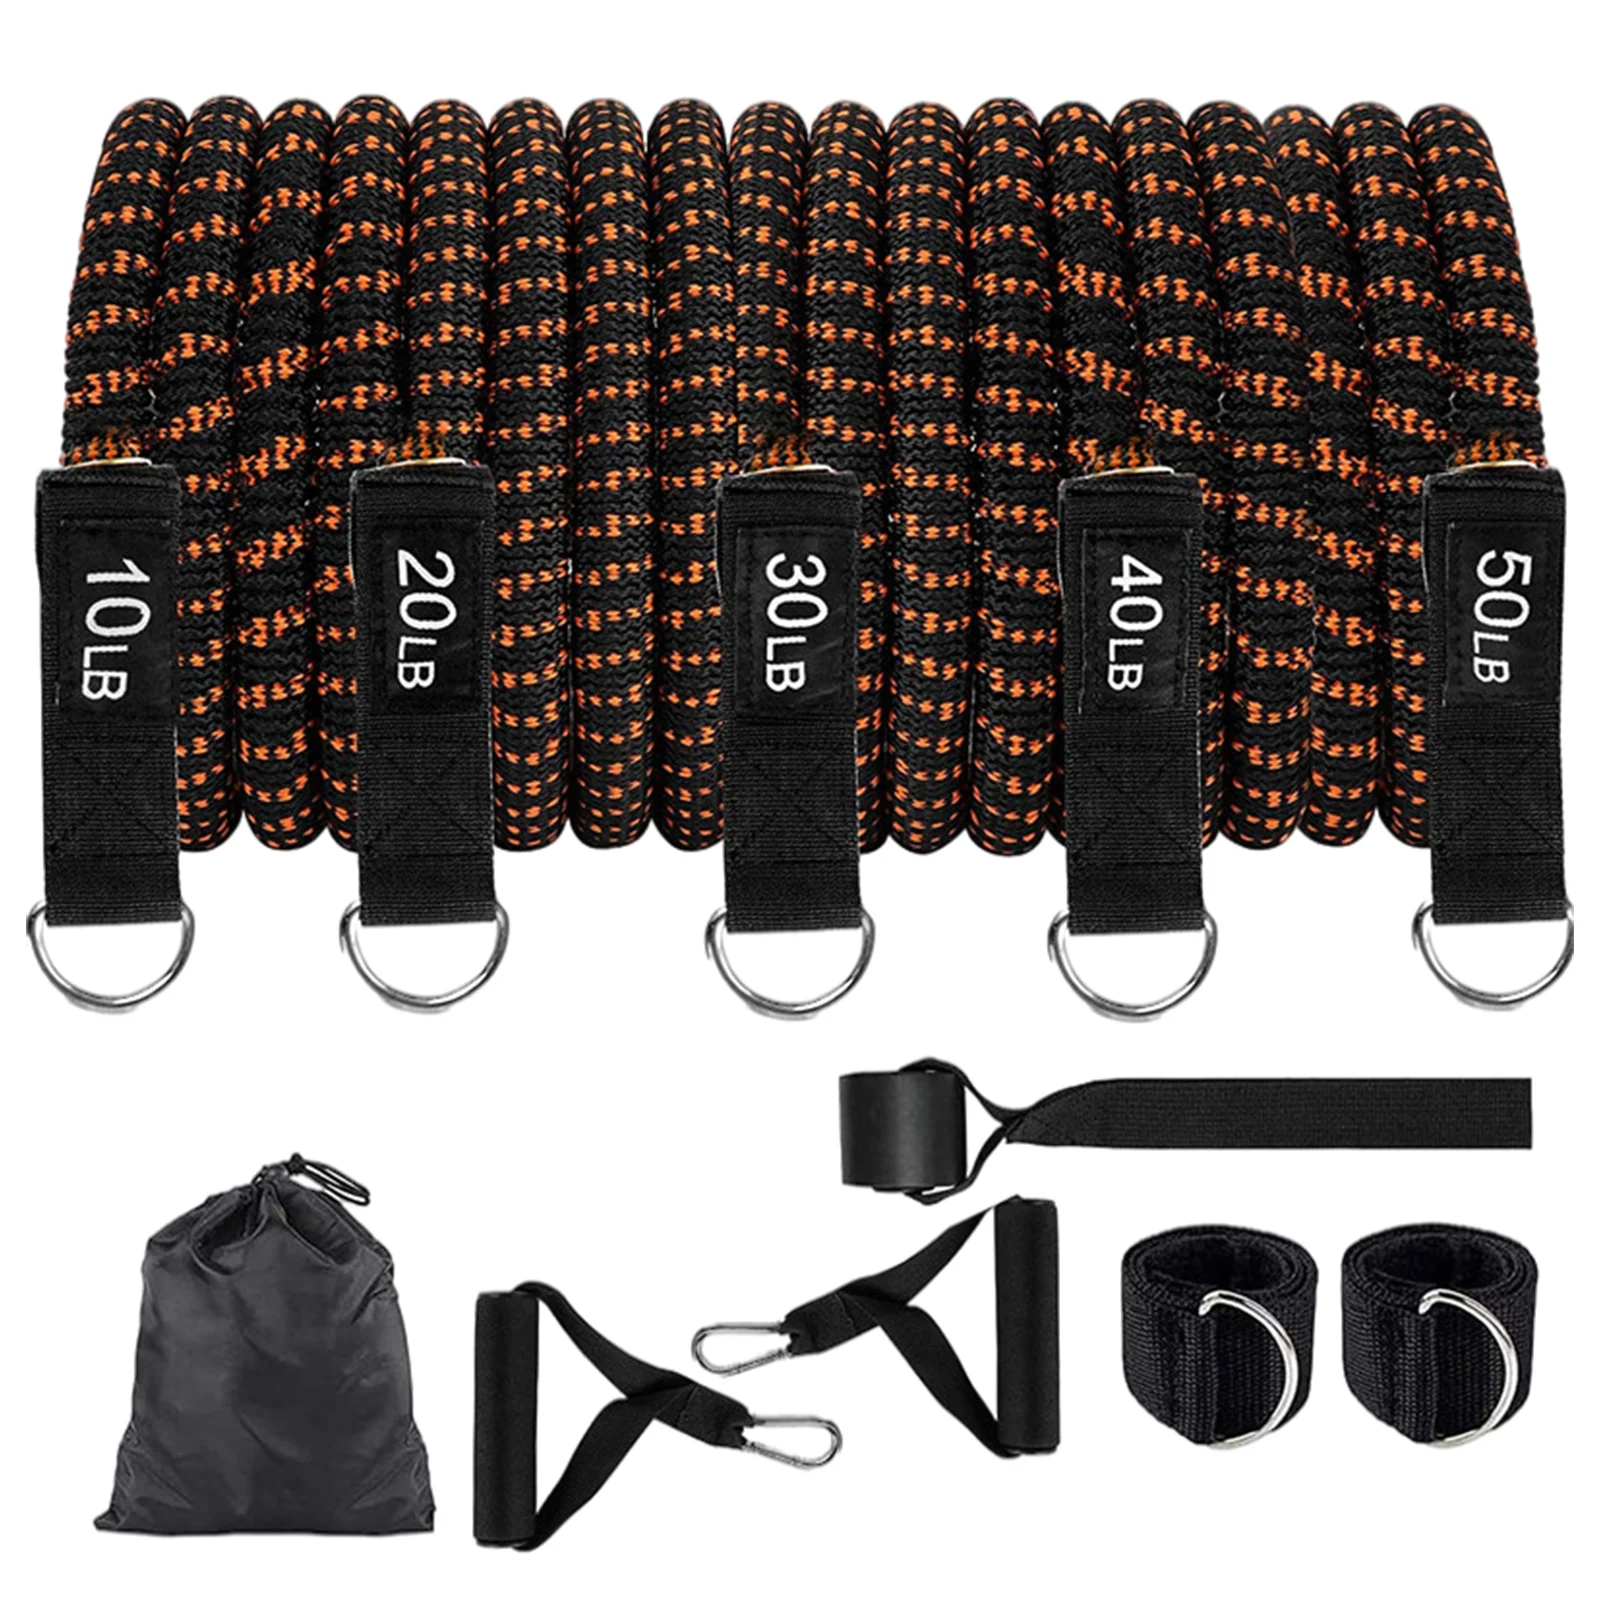 

Load Strength Training Resistance Rope Set 5 Elastic Rope With The Different Tension 11 PCS Sturdy Durable Exercise Intelligent